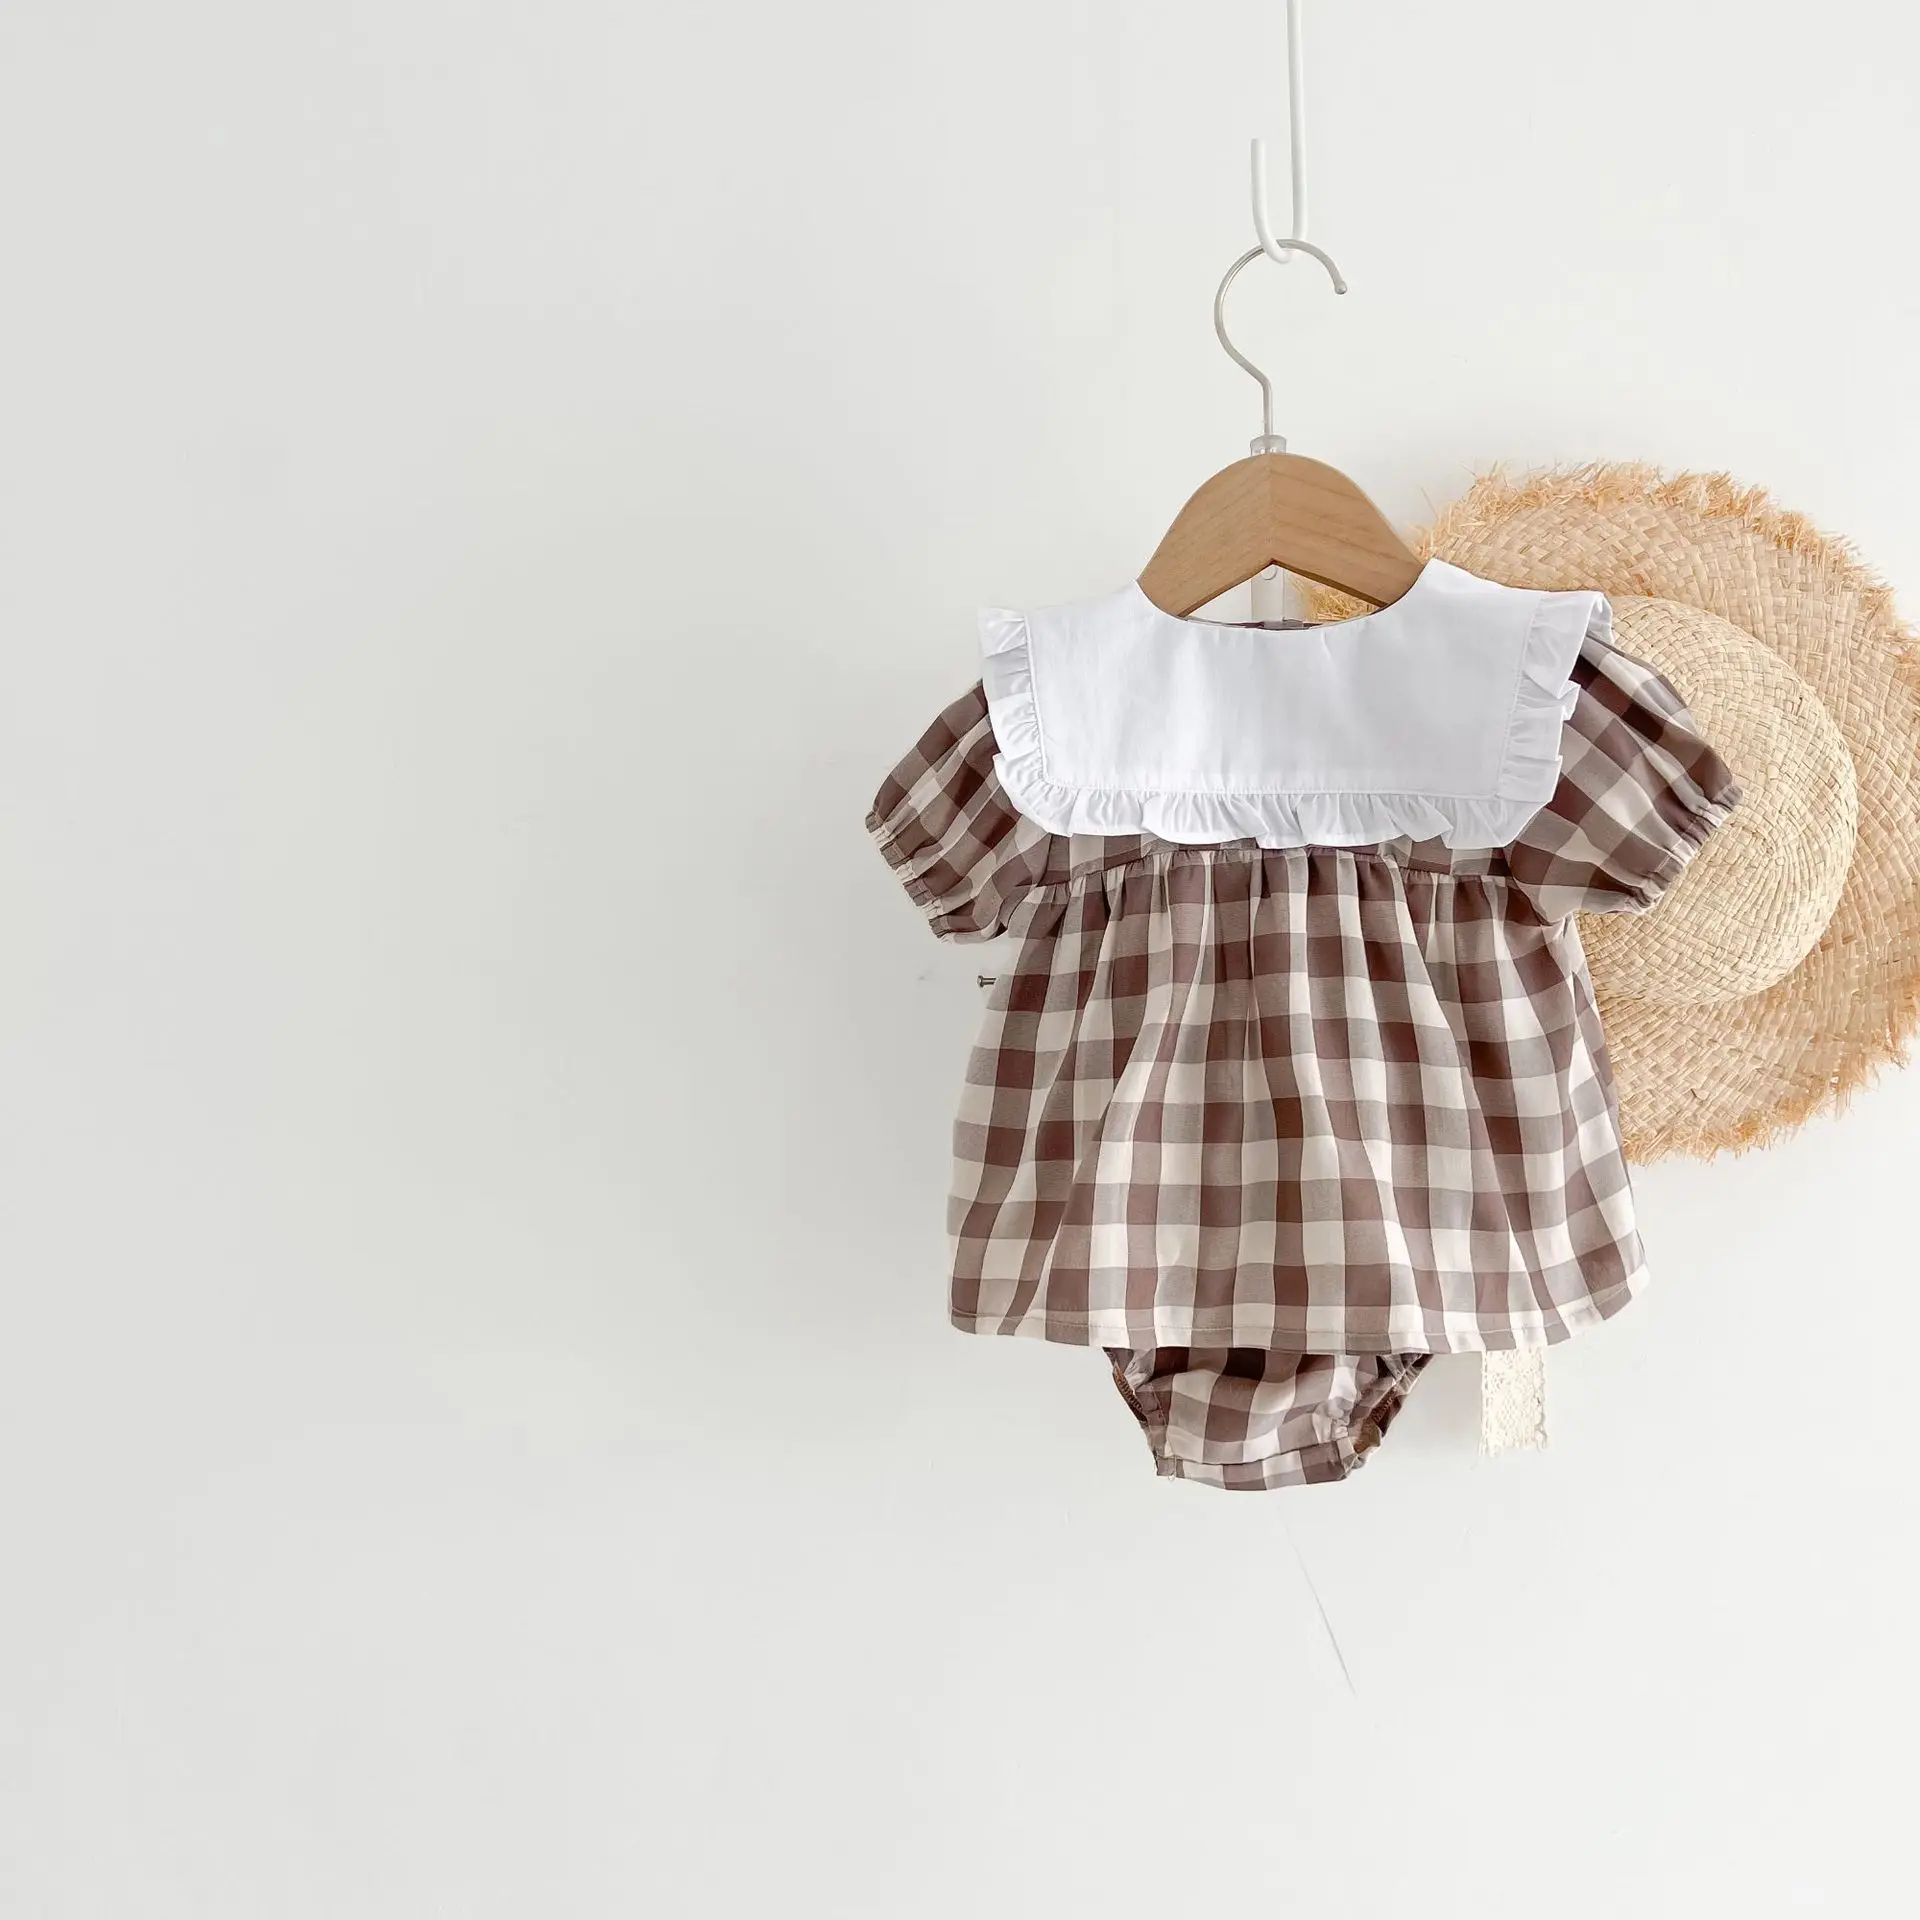 baby knitted clothing set 1711C Baby Clothing Set Plaid Girl's Suit 2022 Summer Cotton Plaid Lapel Girl's Two Piece Clothes Short Sleeve Top +Bread Pants baby outfit matching set